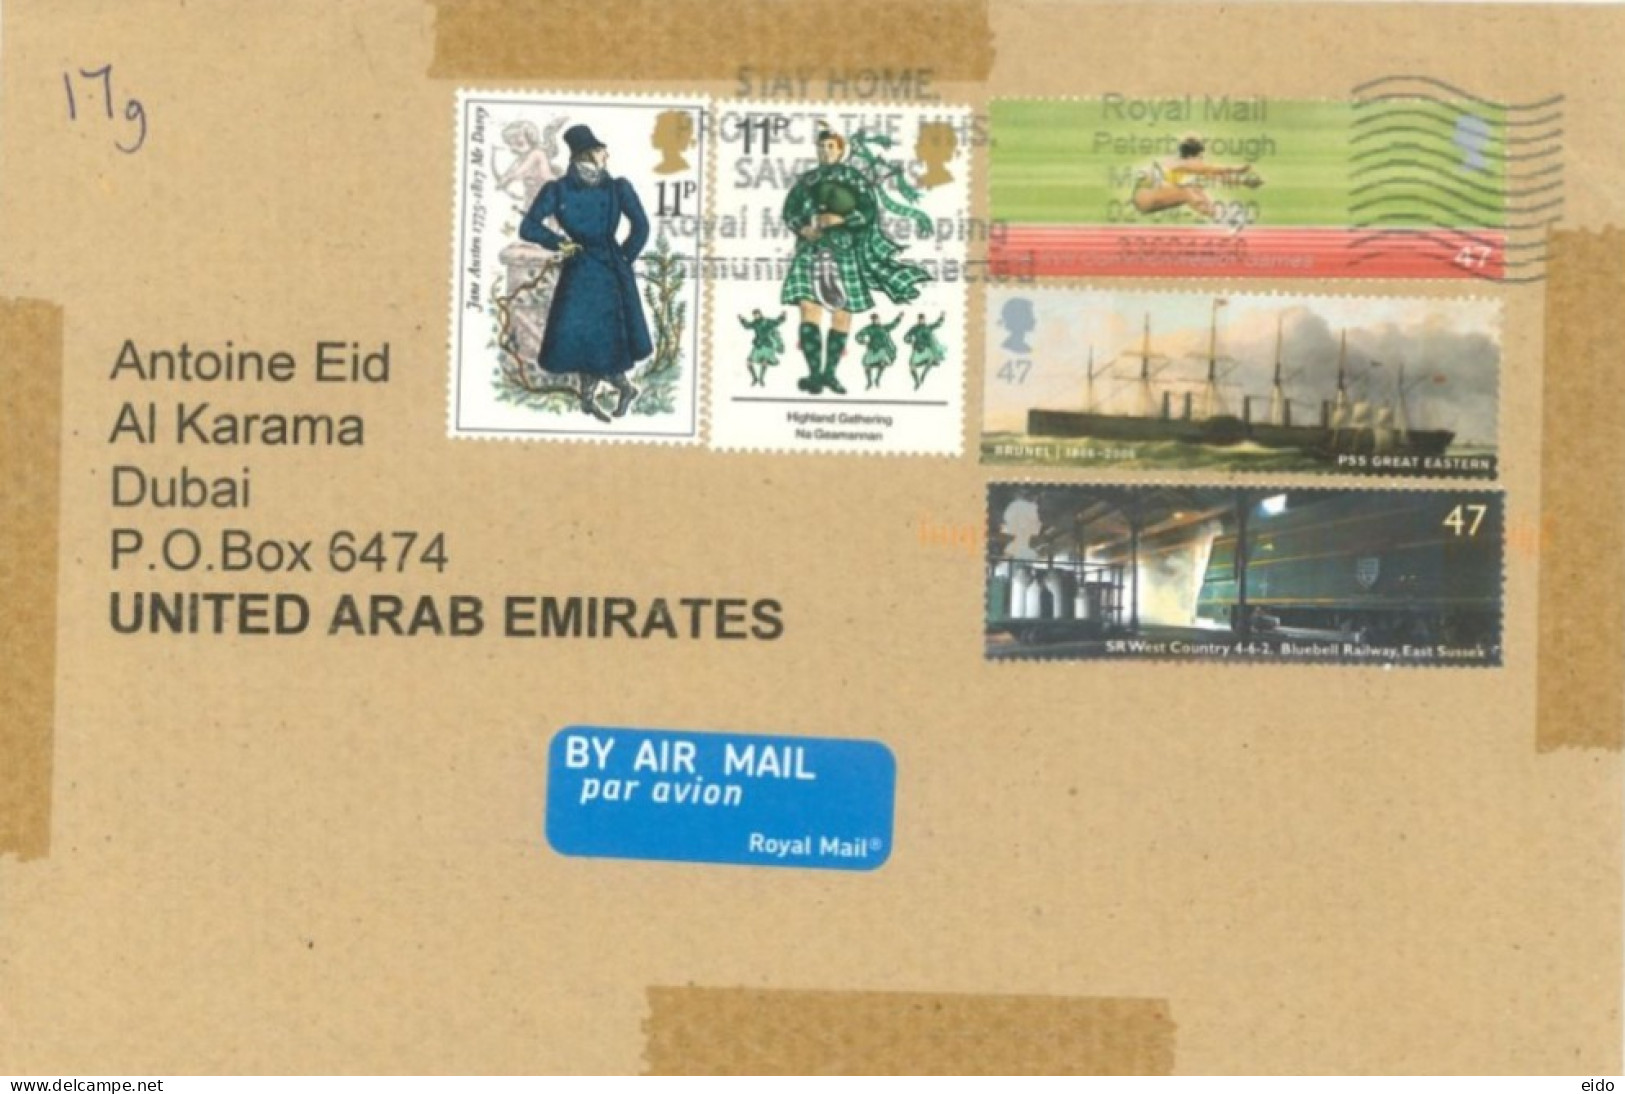 GREAT BRITIAN : 2020, STAMPS COVER TO DUBIA - Briefe U. Dokumente